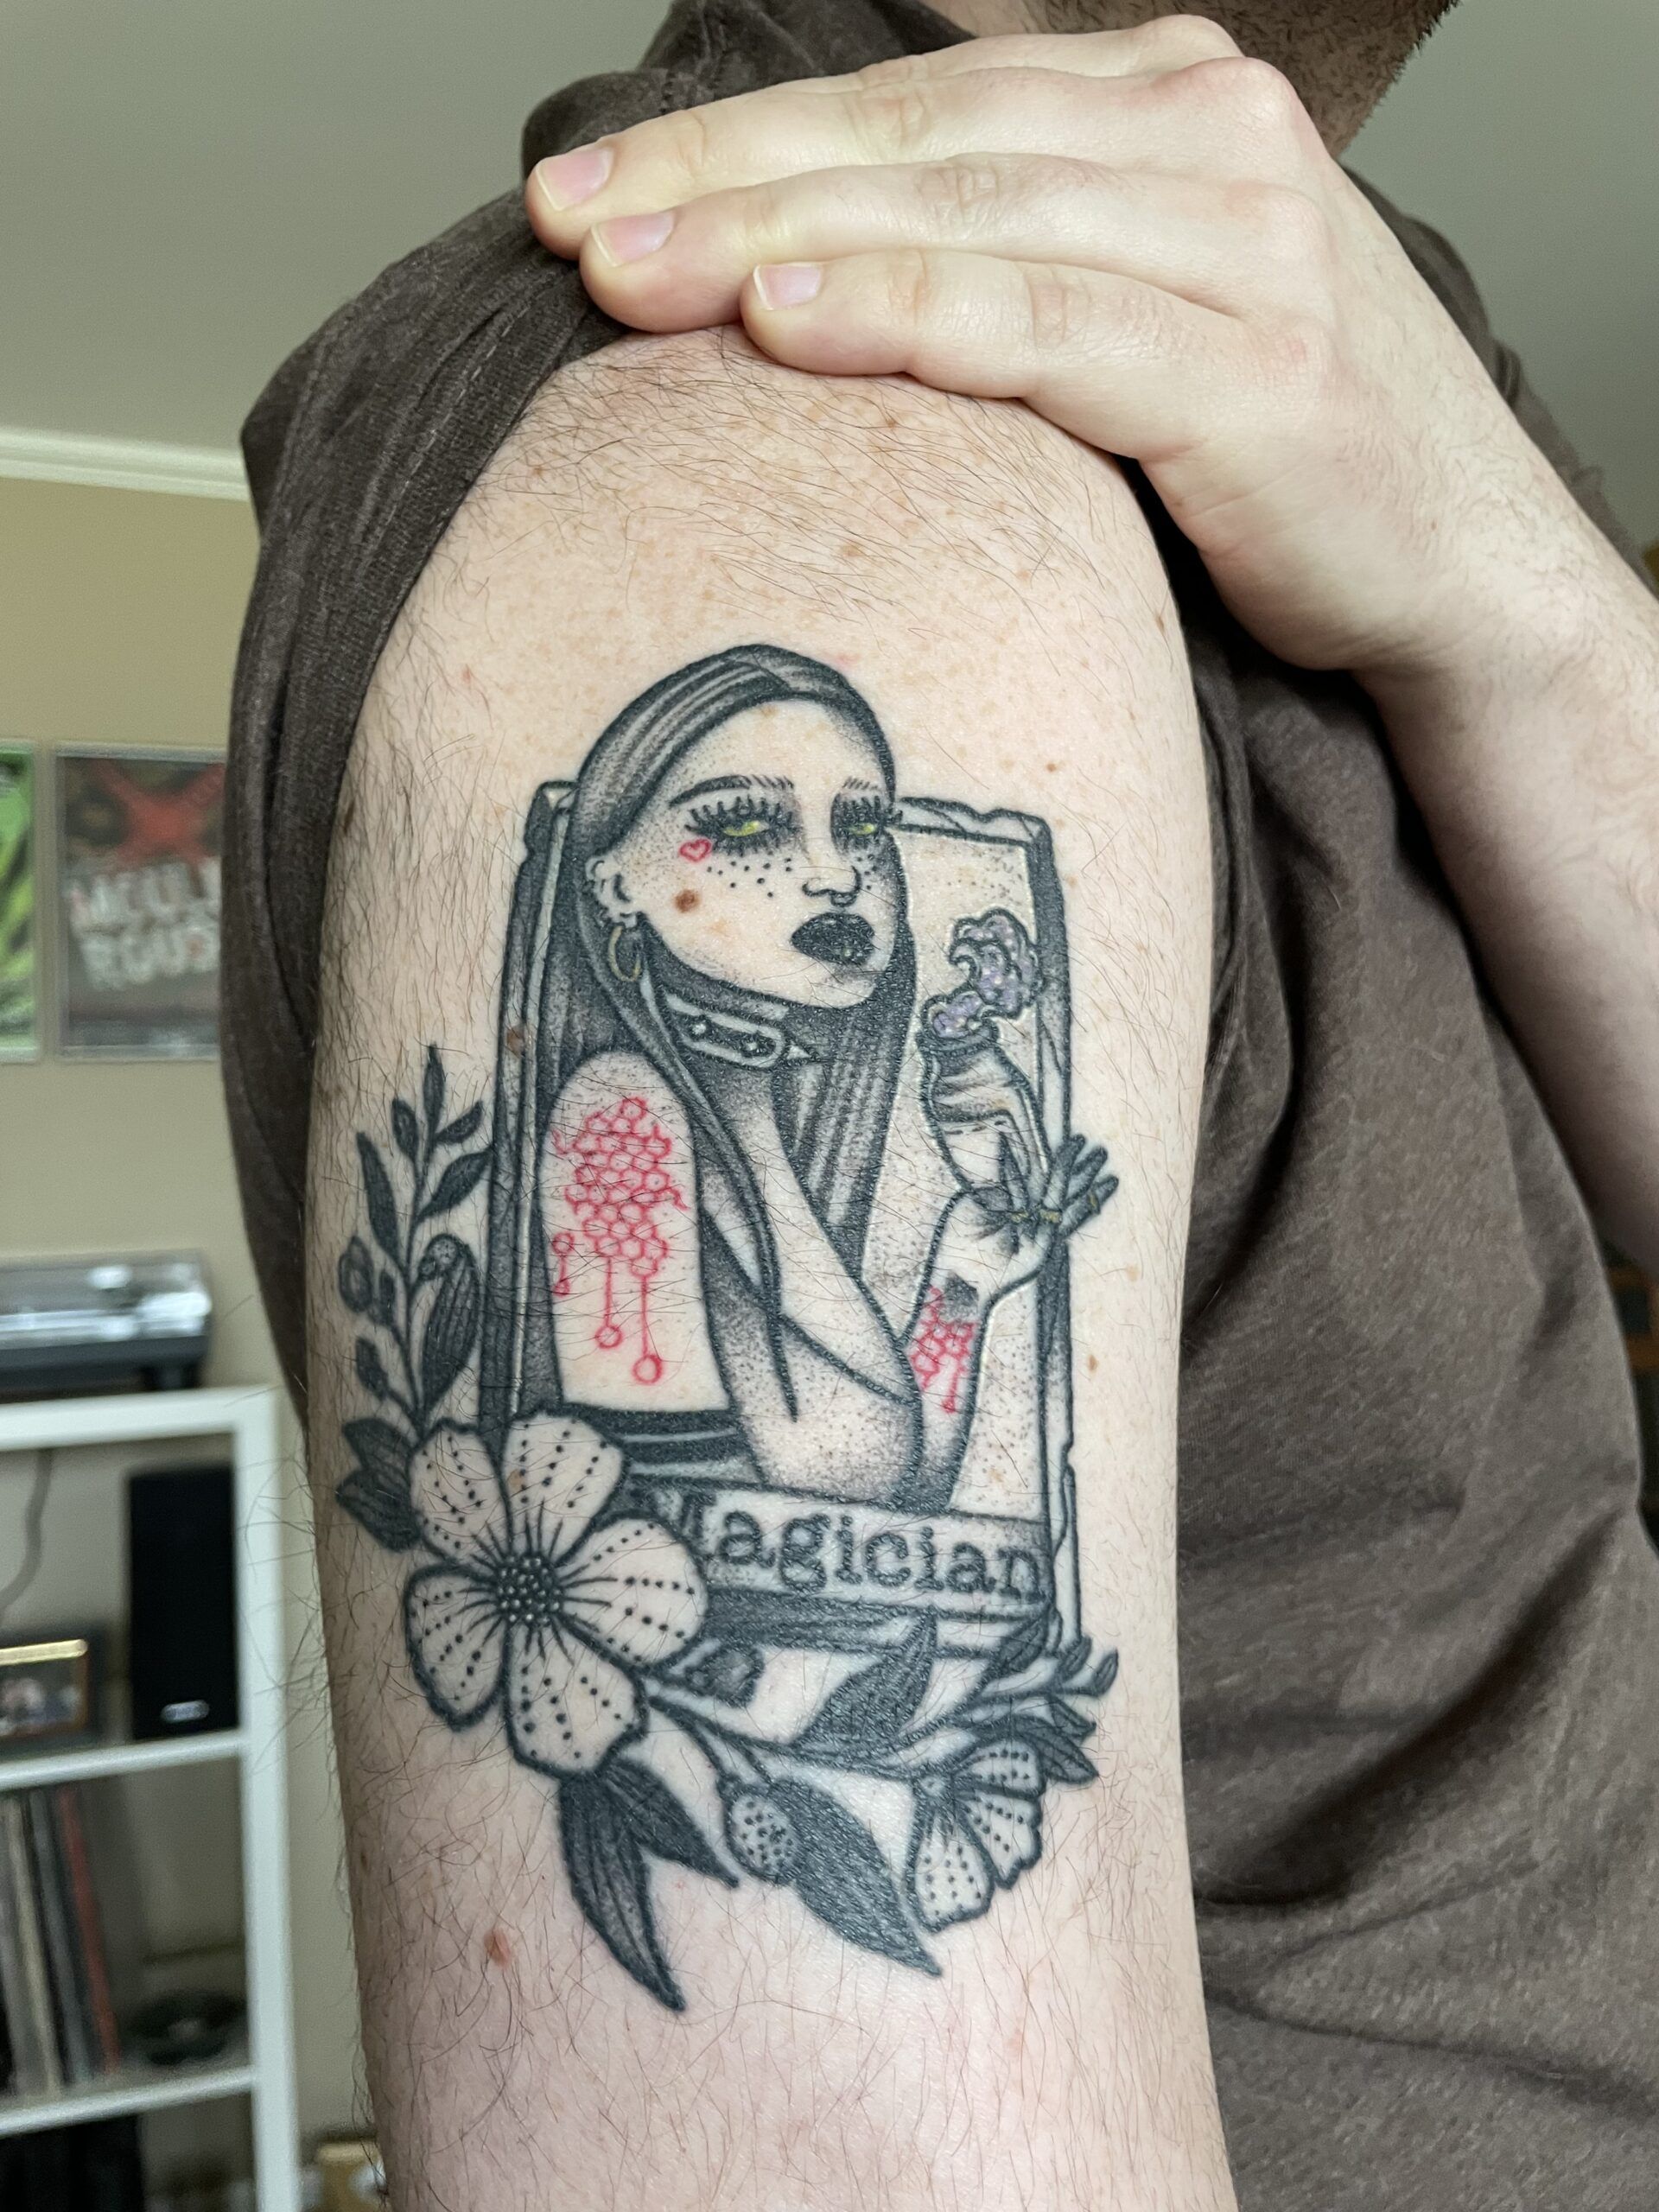 image of tattoo of The Magician tarot card in a cyberpunk style